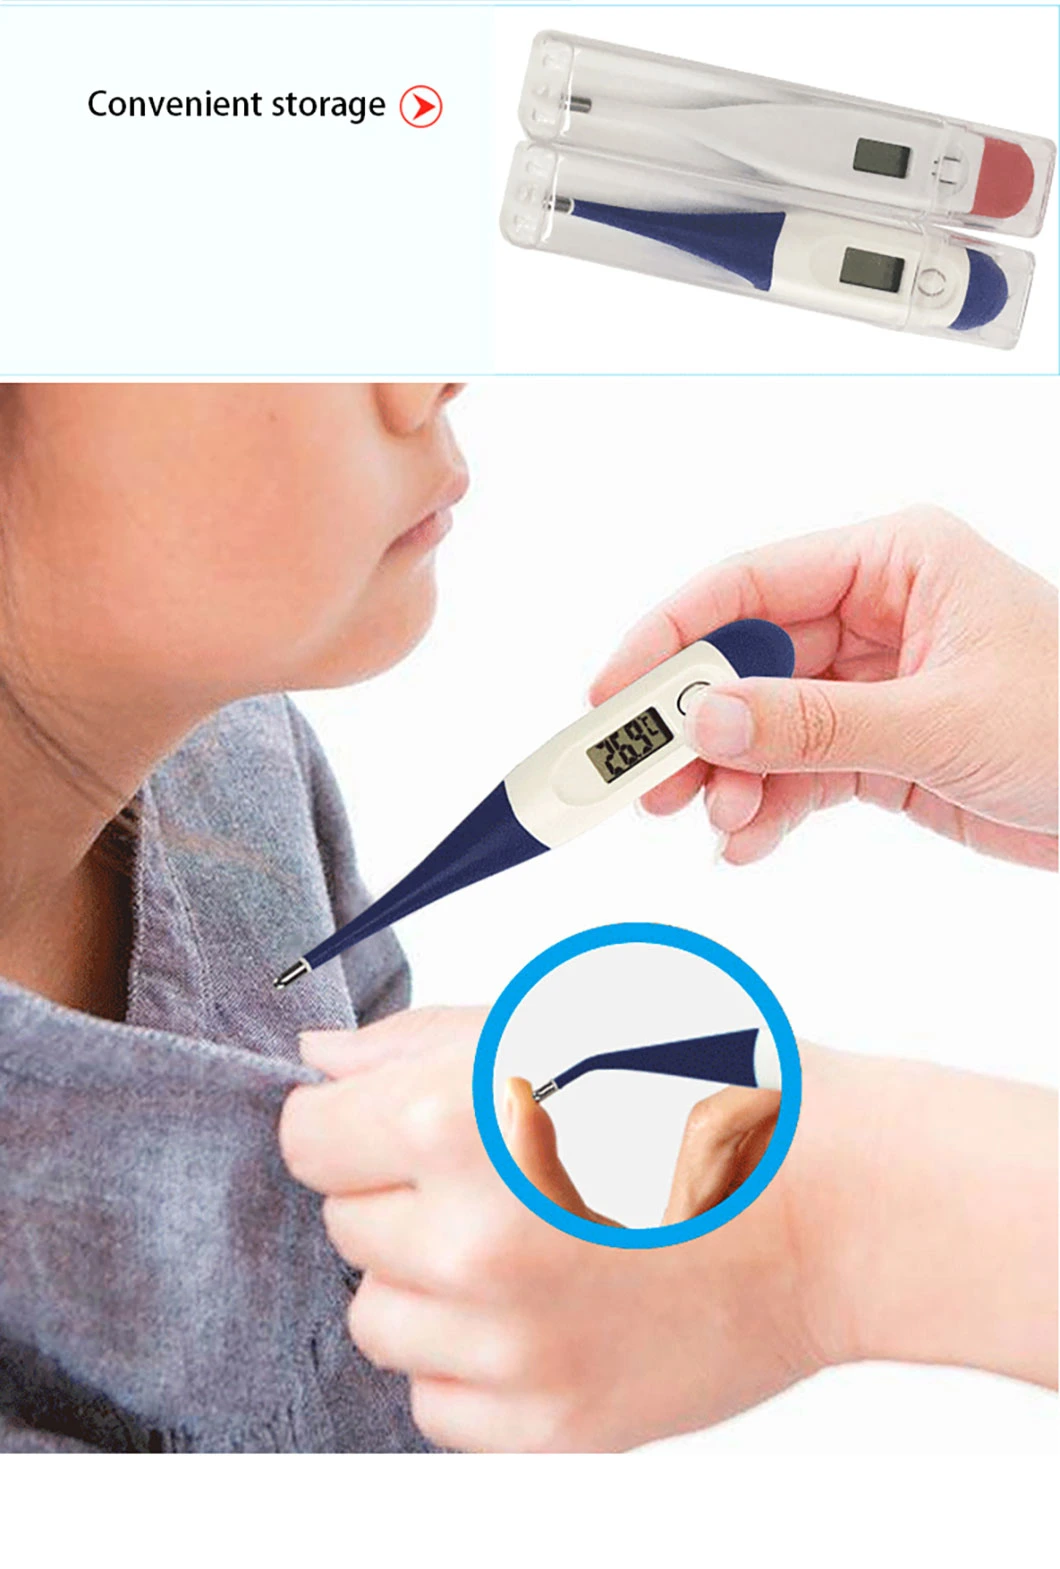 Manufacturer Safe Baby Adult Body Temperature Electronic Digital LED Display Accurate Thermometer